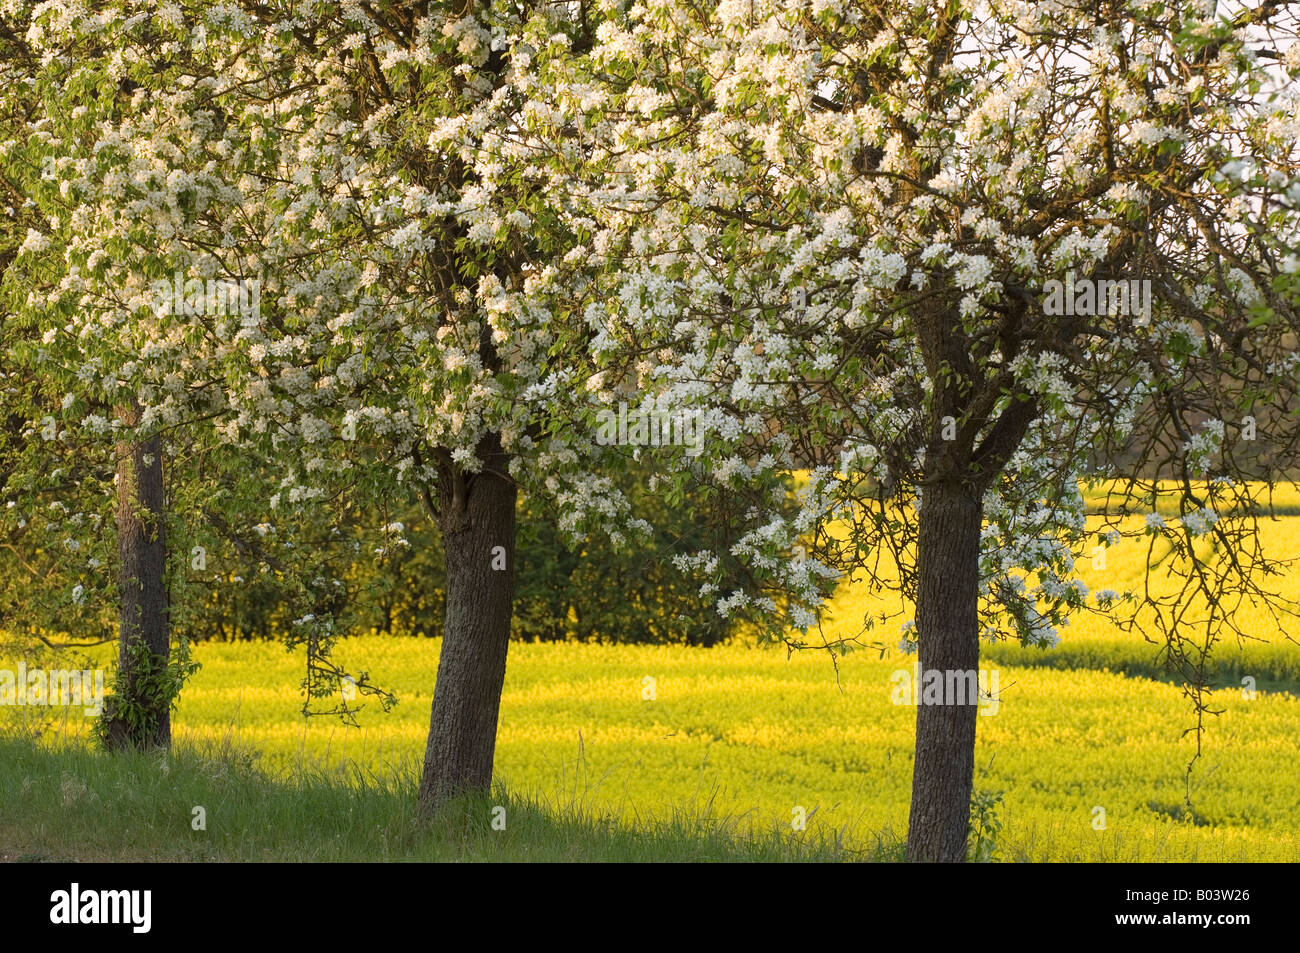 Bloomy Fruit Trees in Germany Stock Photo